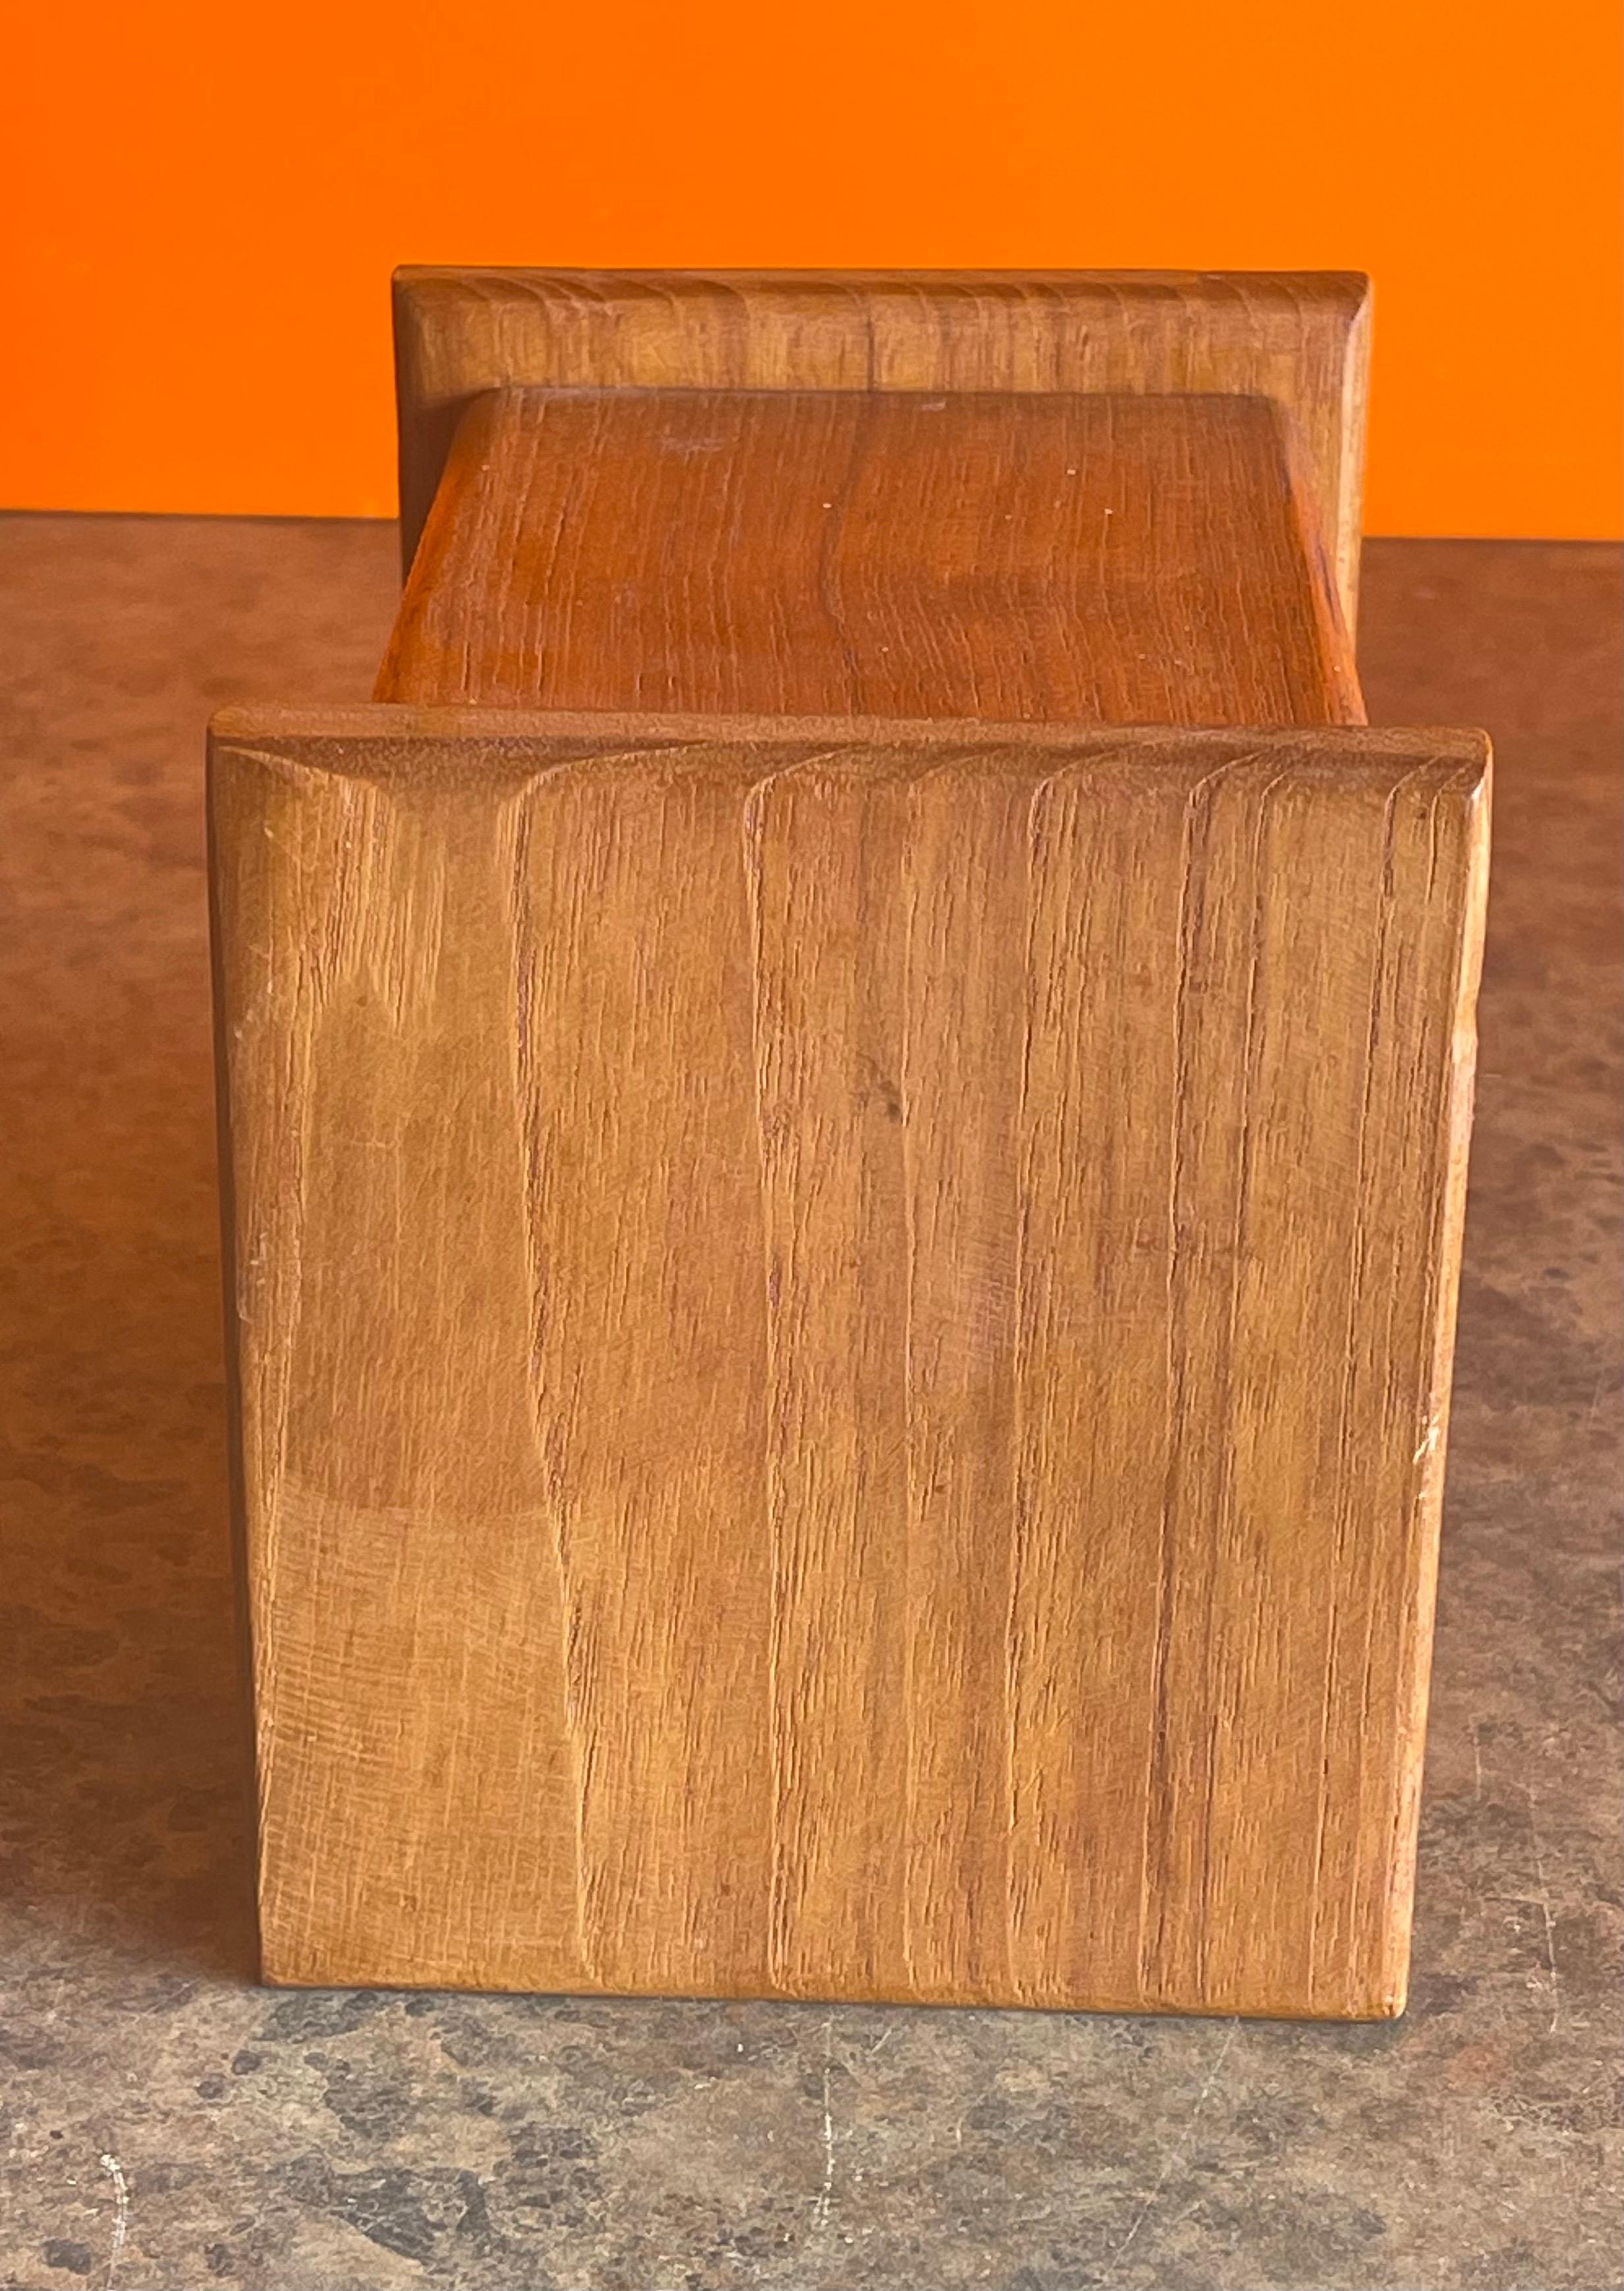 MCM Teak Index Card File / Box In Good Condition For Sale In San Diego, CA